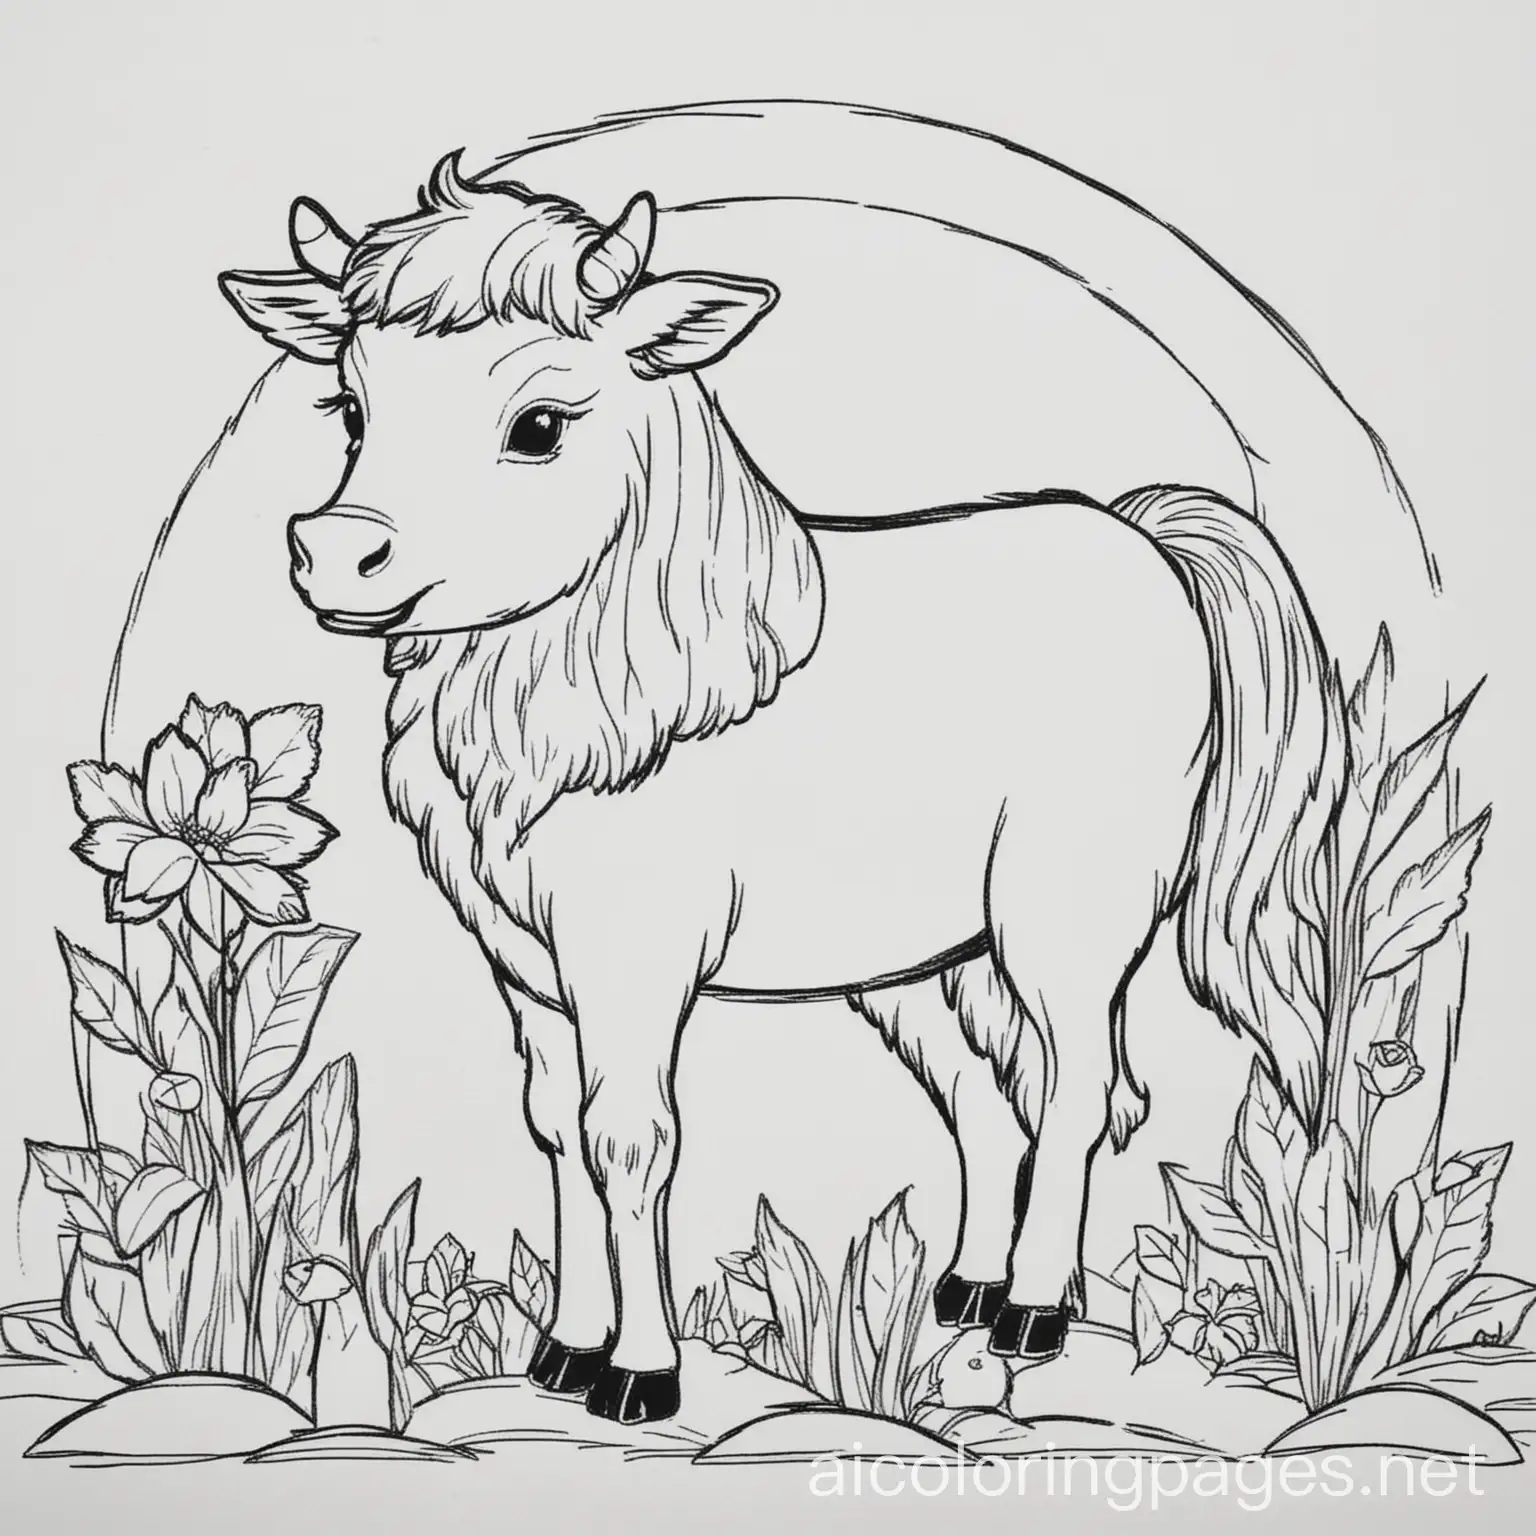 Simple-Farm-Animal-Coloring-Page-for-Kids-Black-and-White-Line-Art-on-White-Background